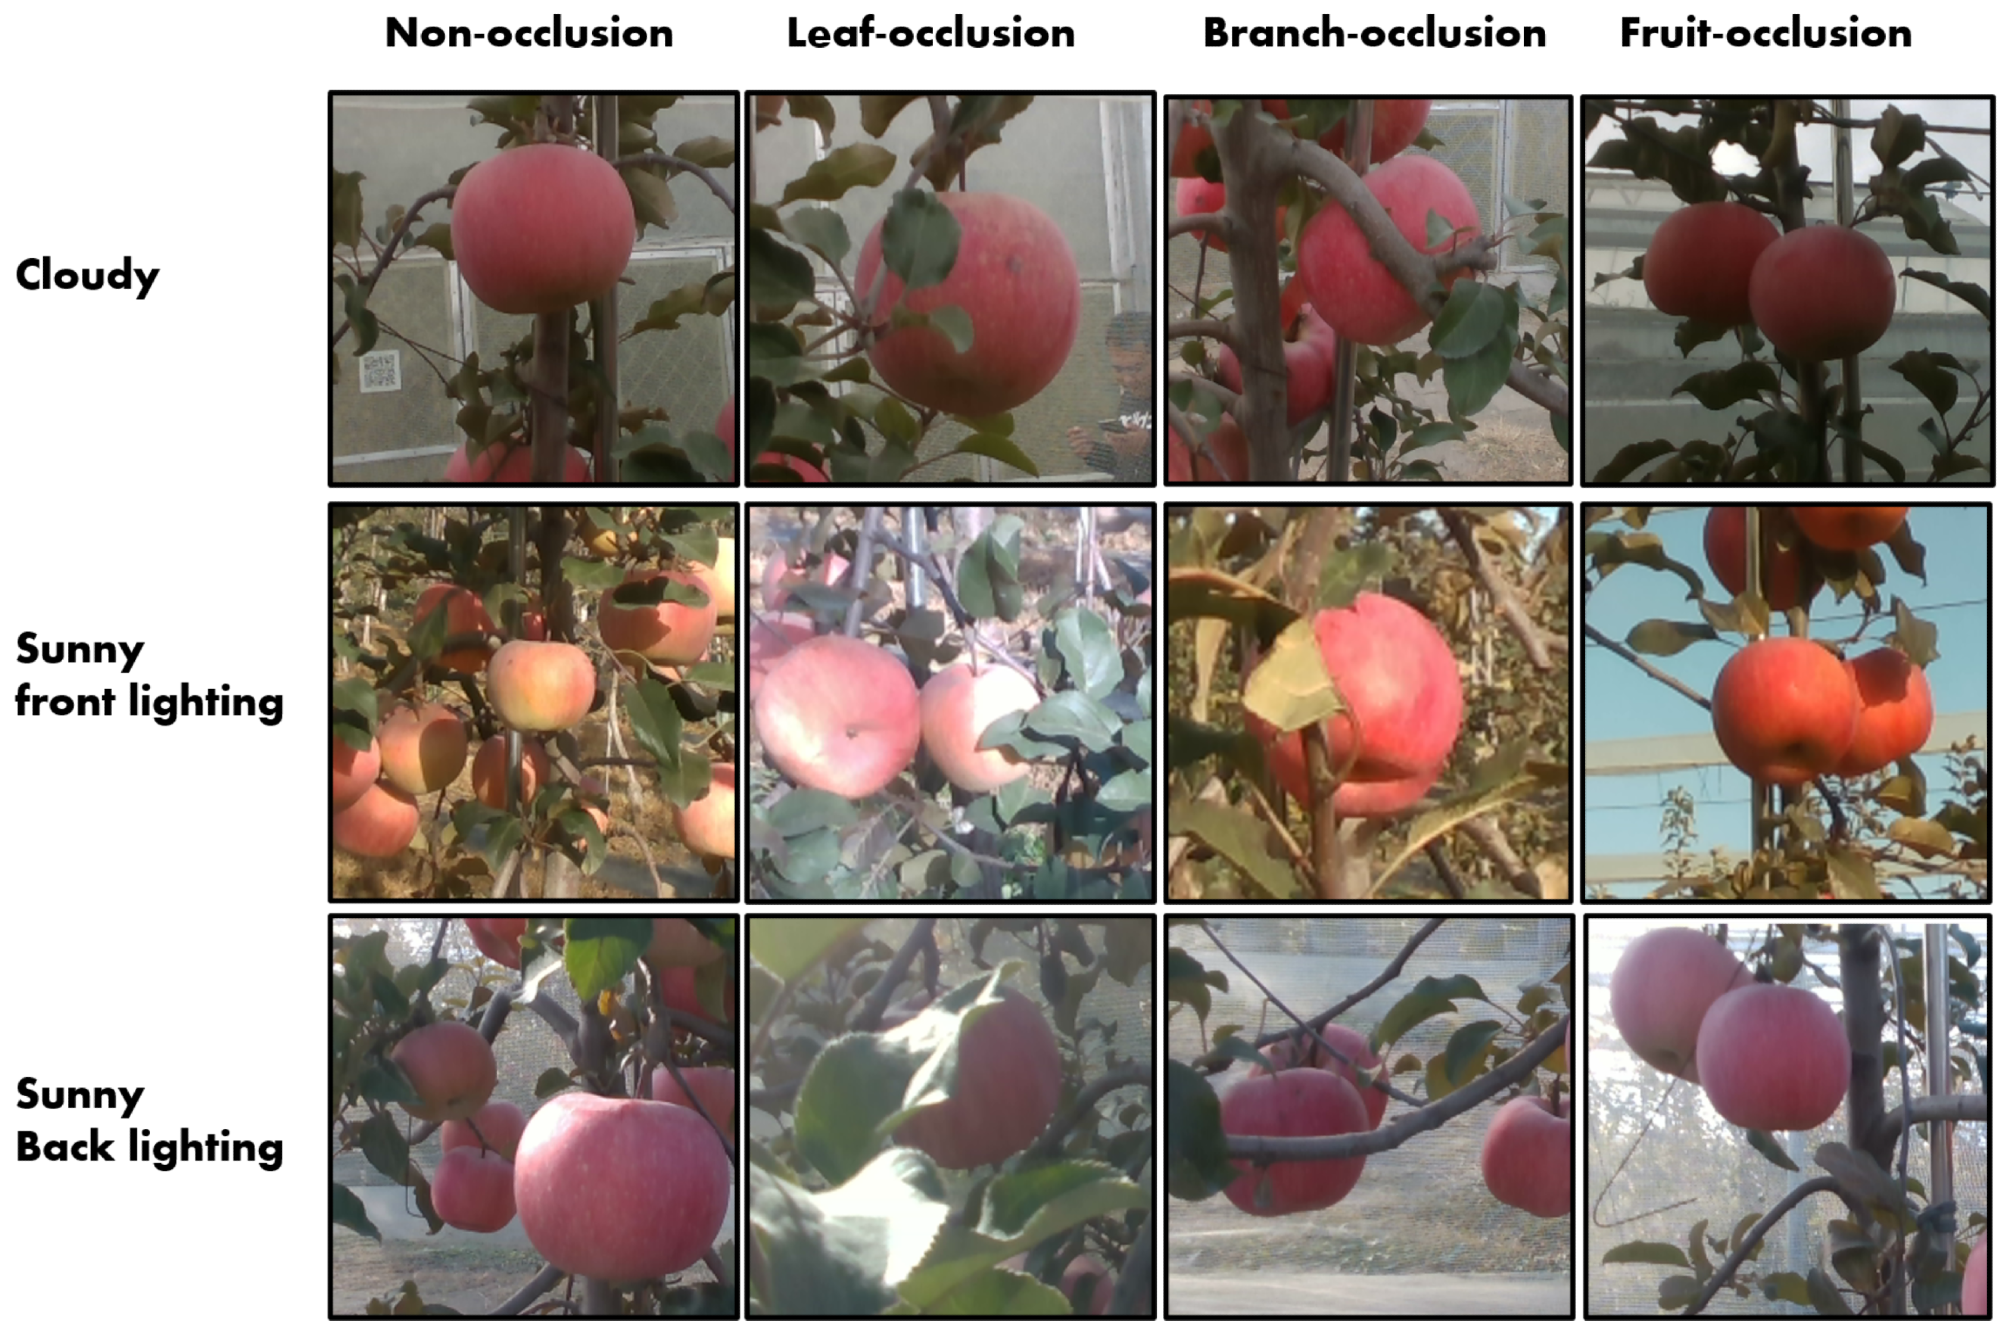 The apple fruits under different illuminations and occlusions